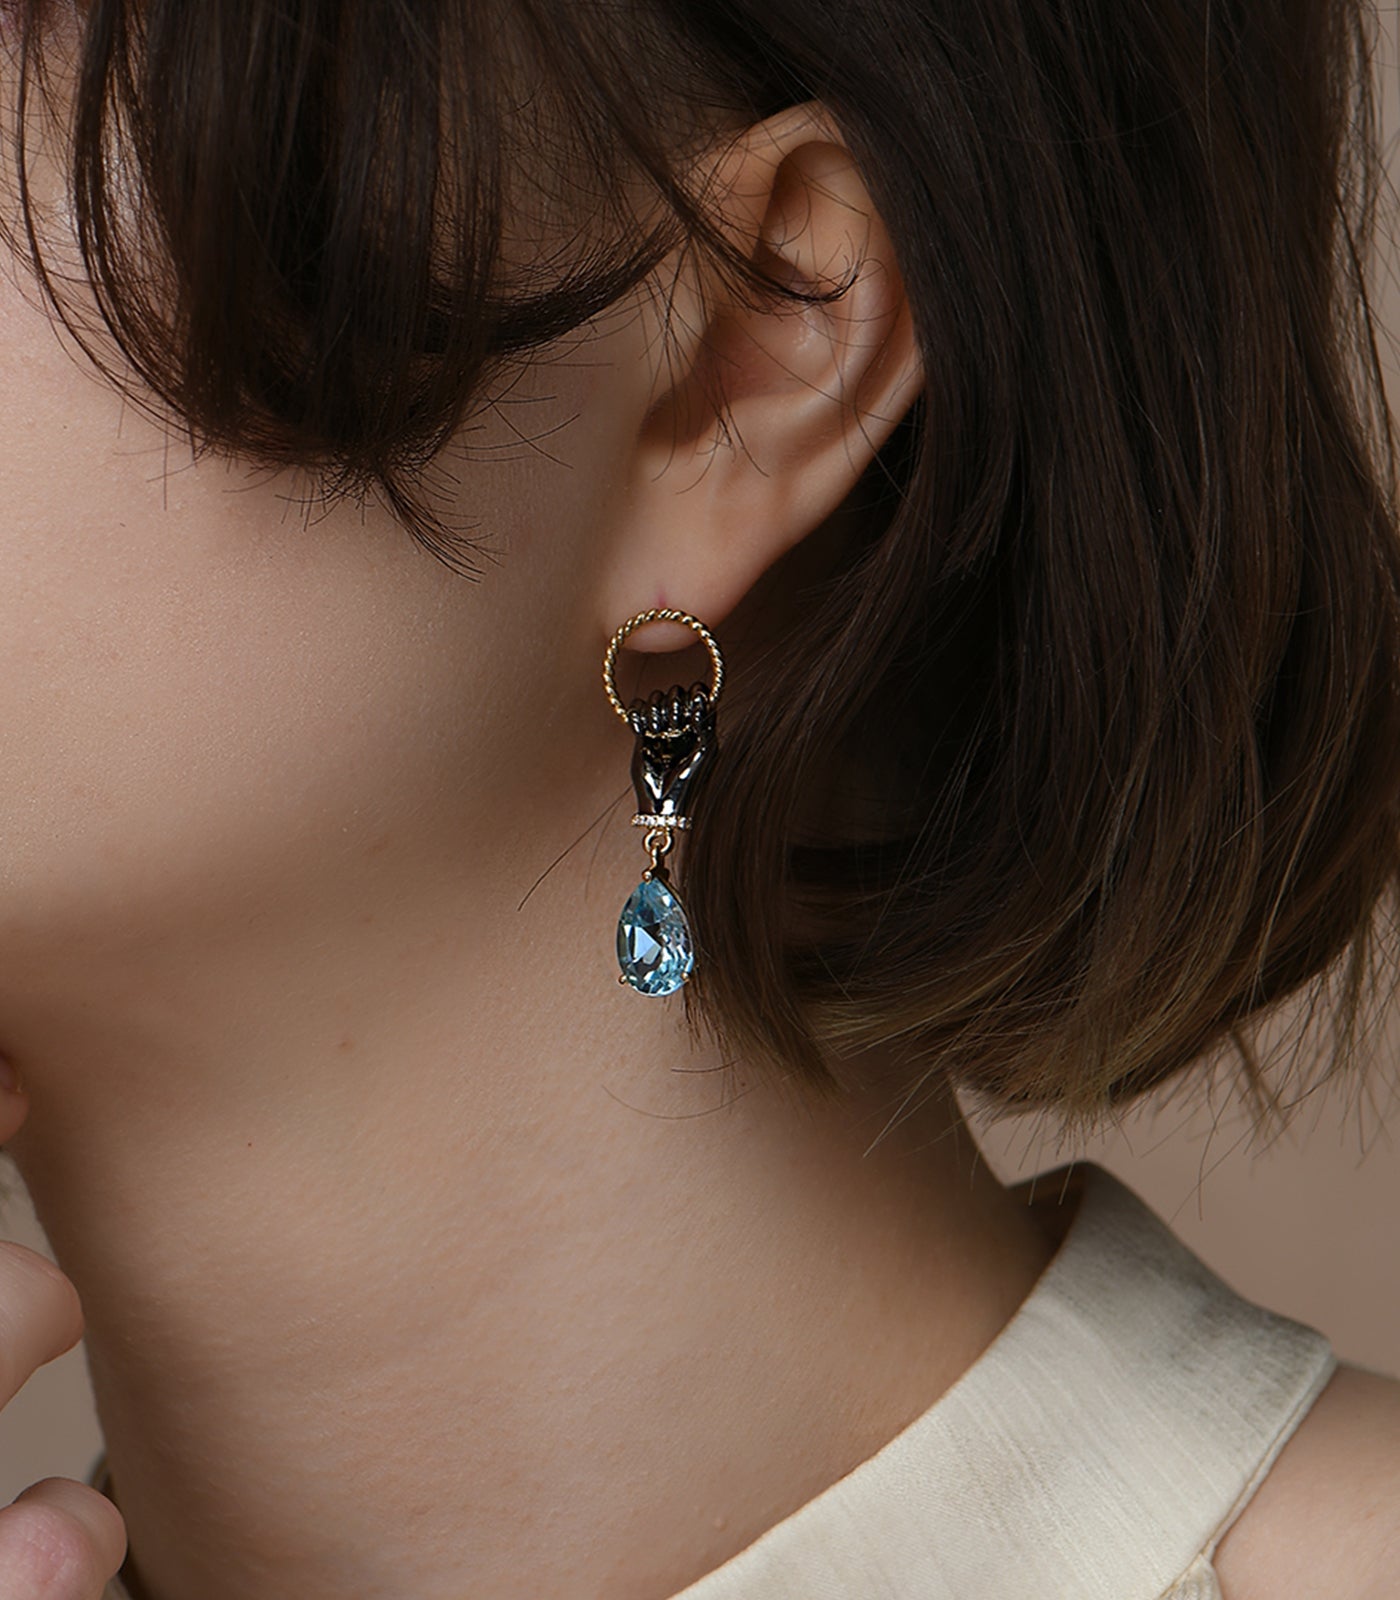 A pair of earrings with a small hoop stud and a fist held on to the hoop. A blue topaz stone dangles from the hand.